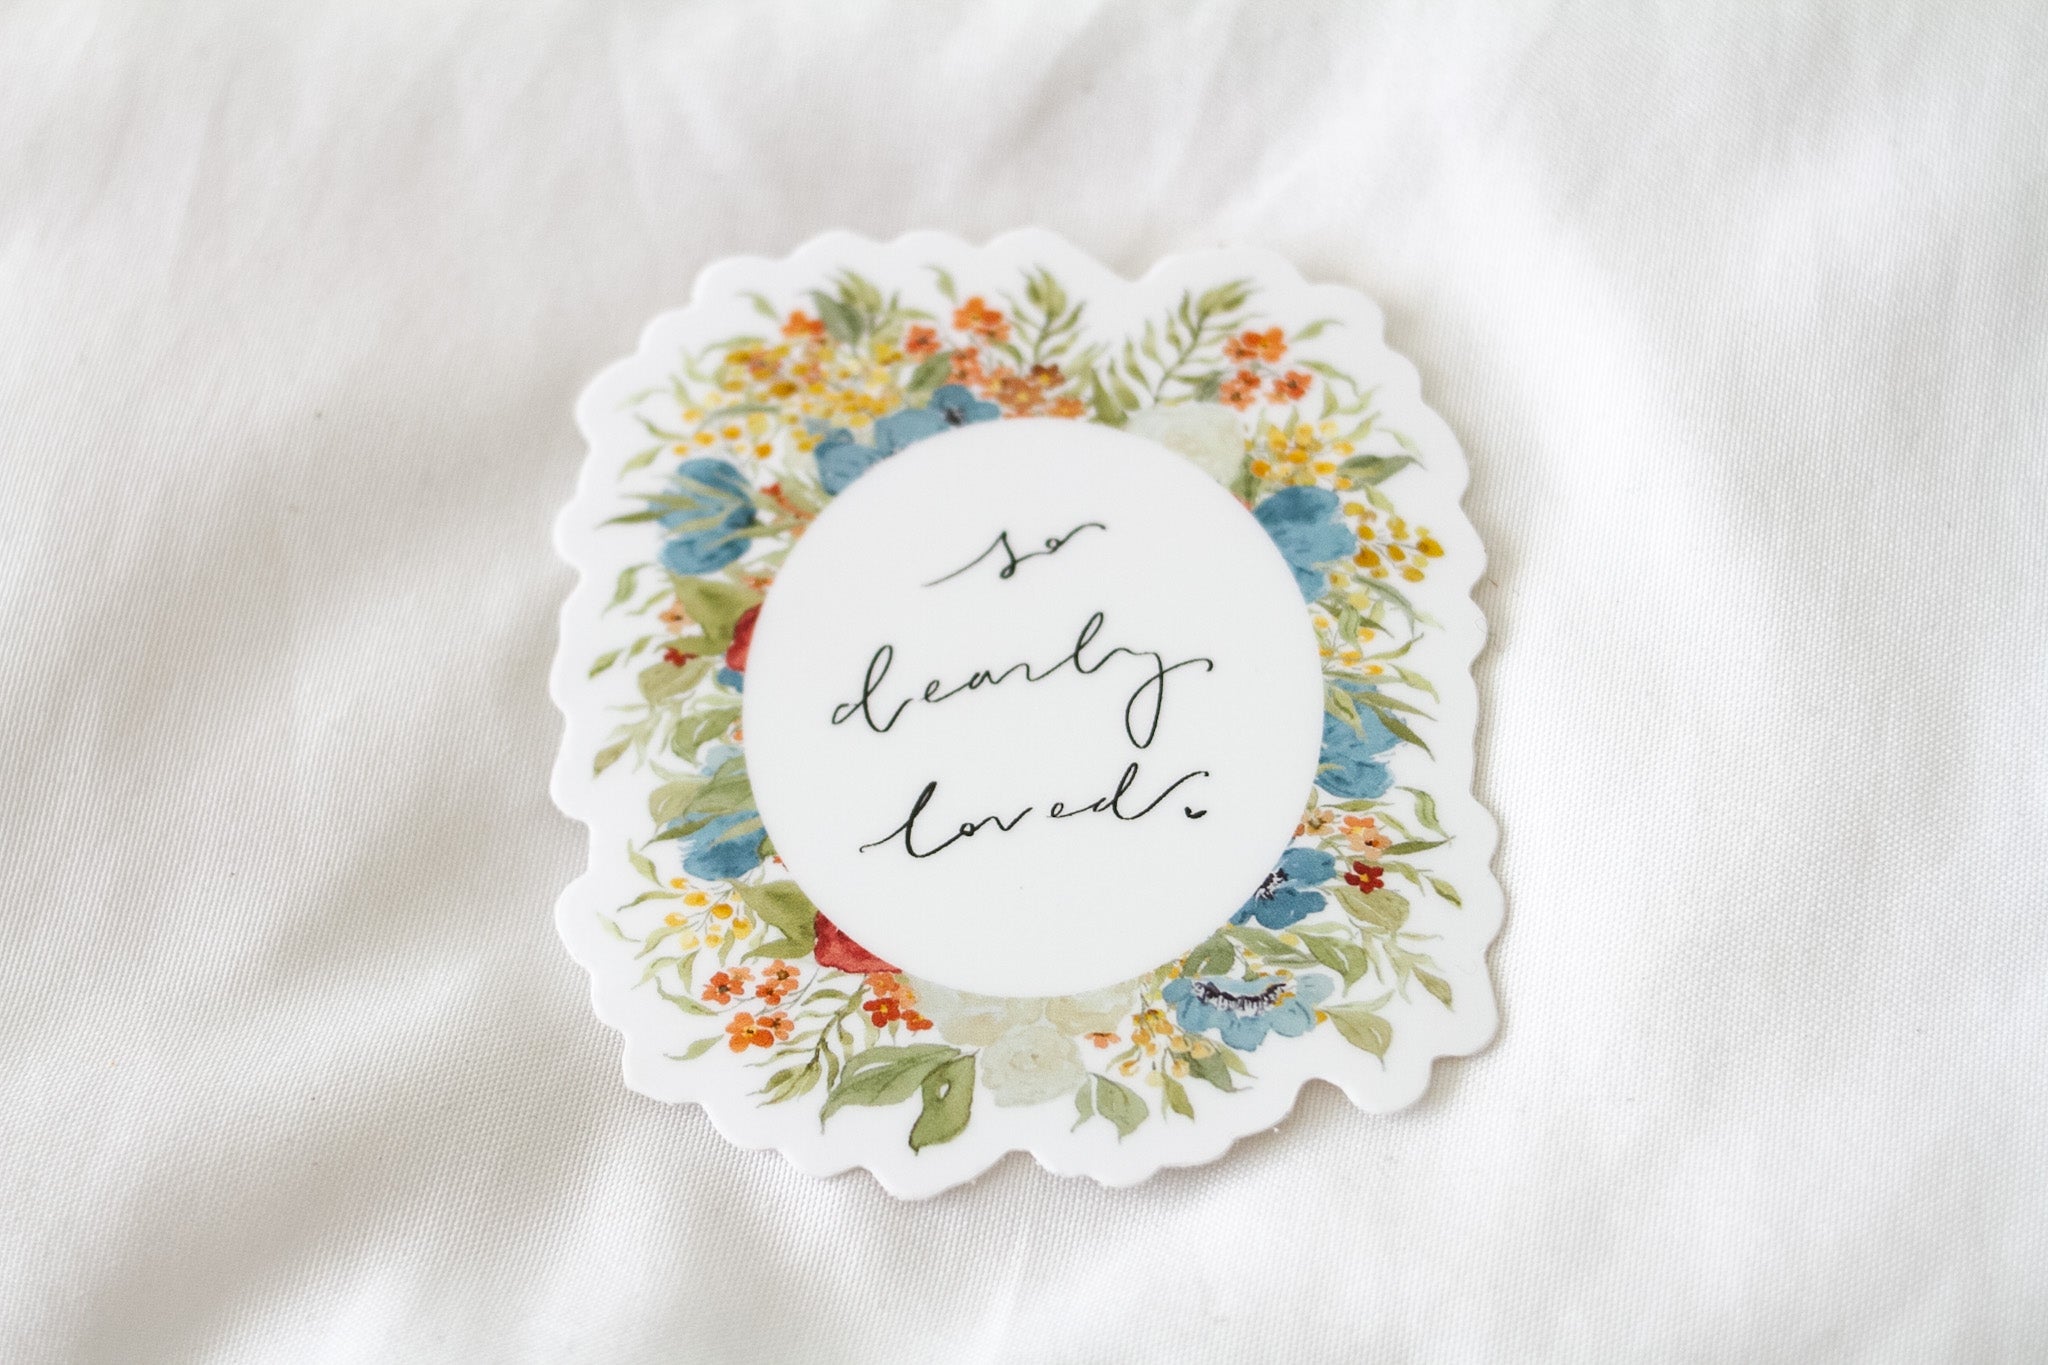 Beatrice "So Dearly Loved" Sticker